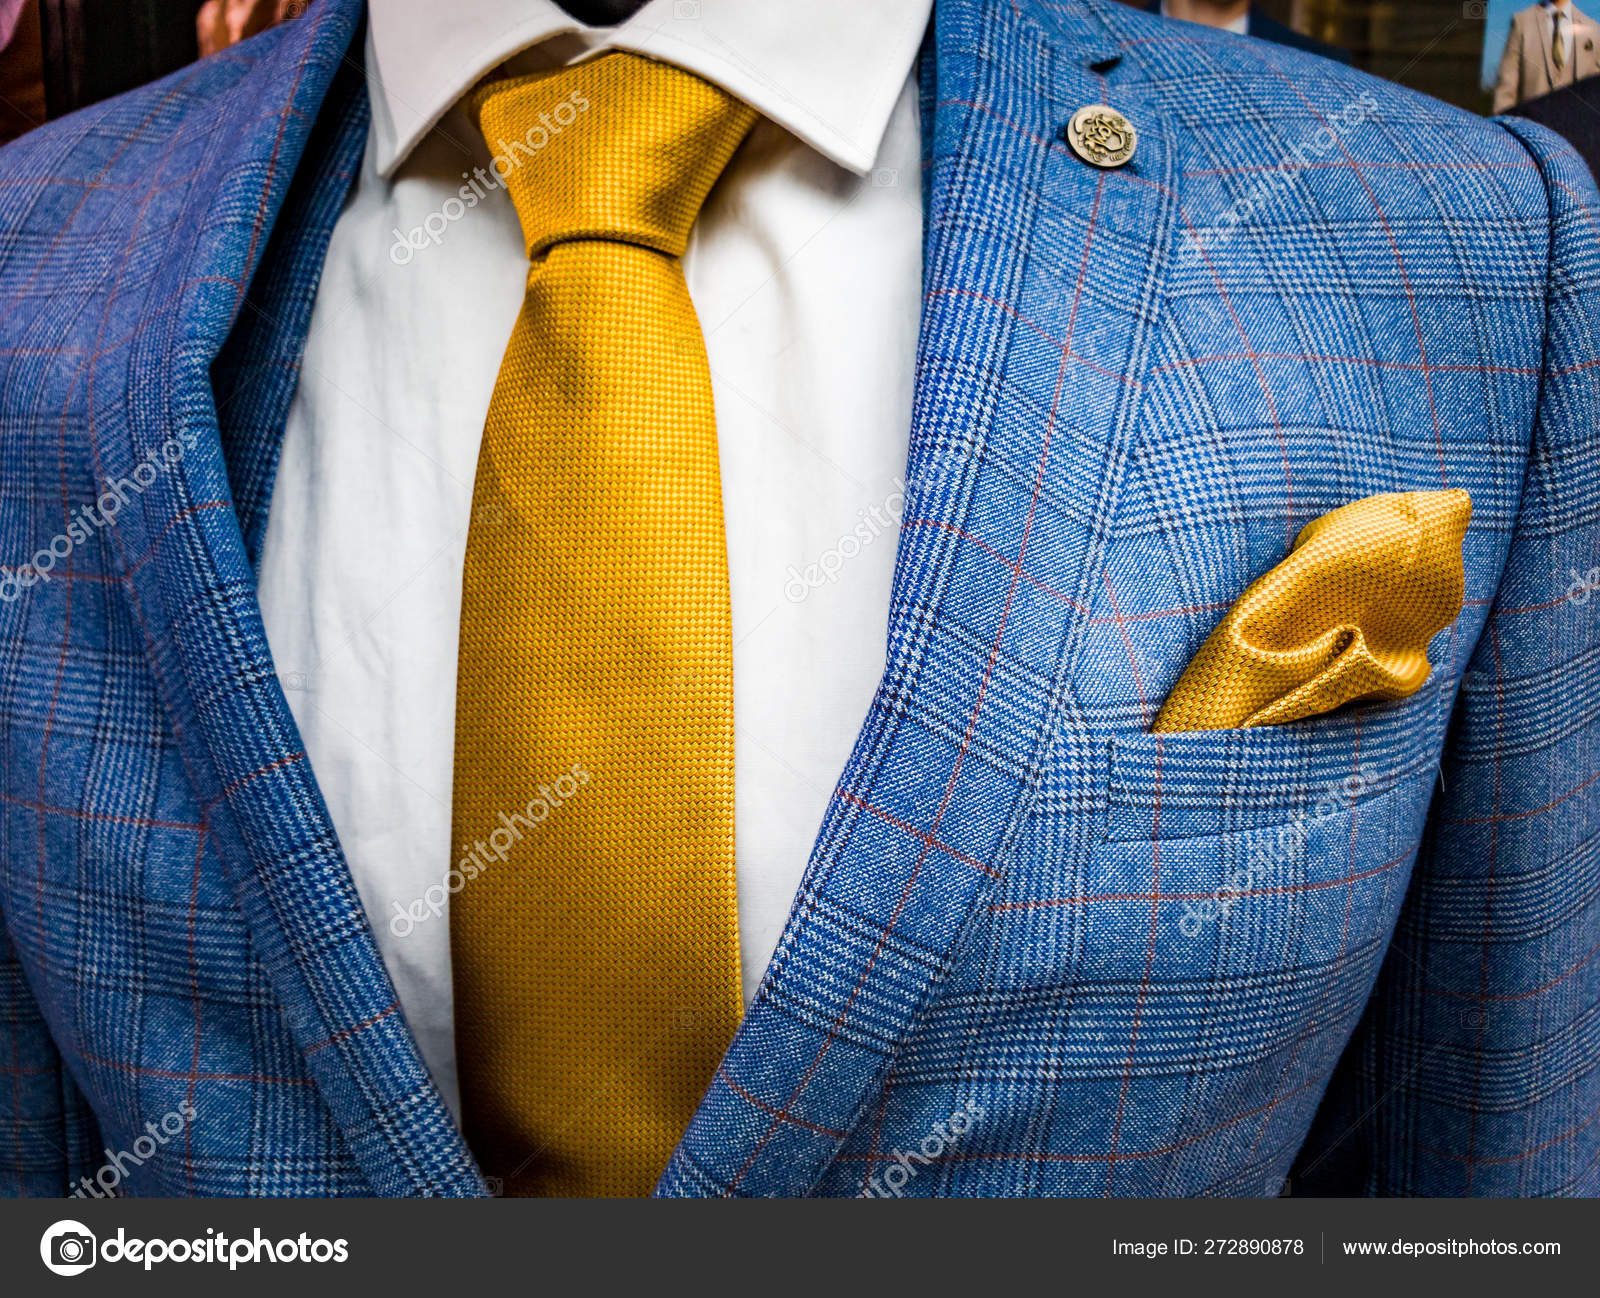 Latest Trends In Suit, Shirt And Tie Combination Blue Suit Yellow Tie ...